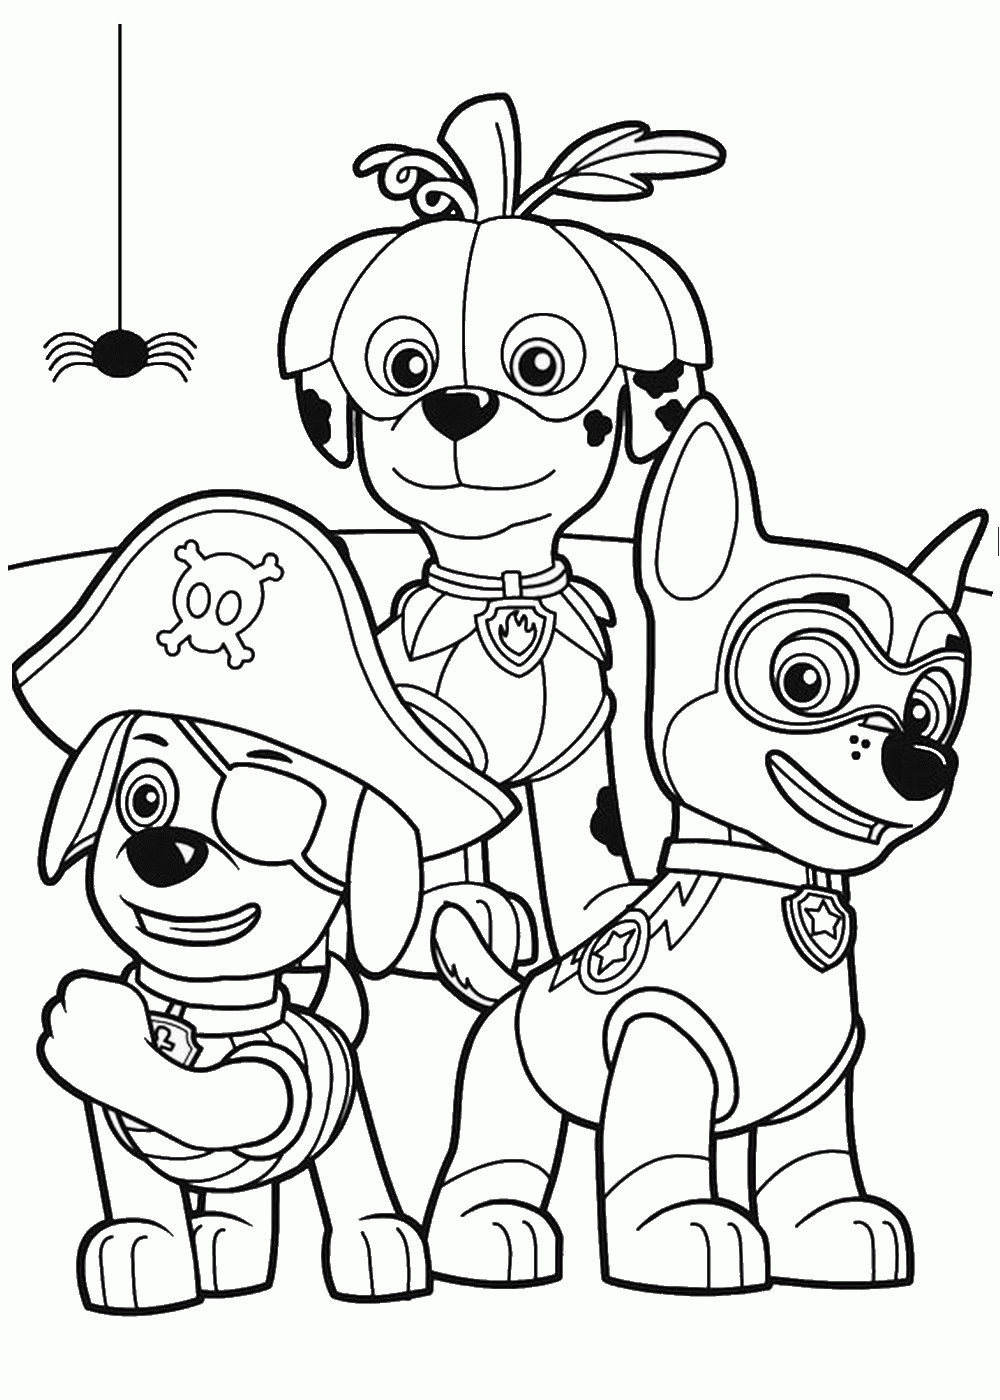 15 Pics of Coloring Pages PAW Patrol Birthday - PAW Patrol ...